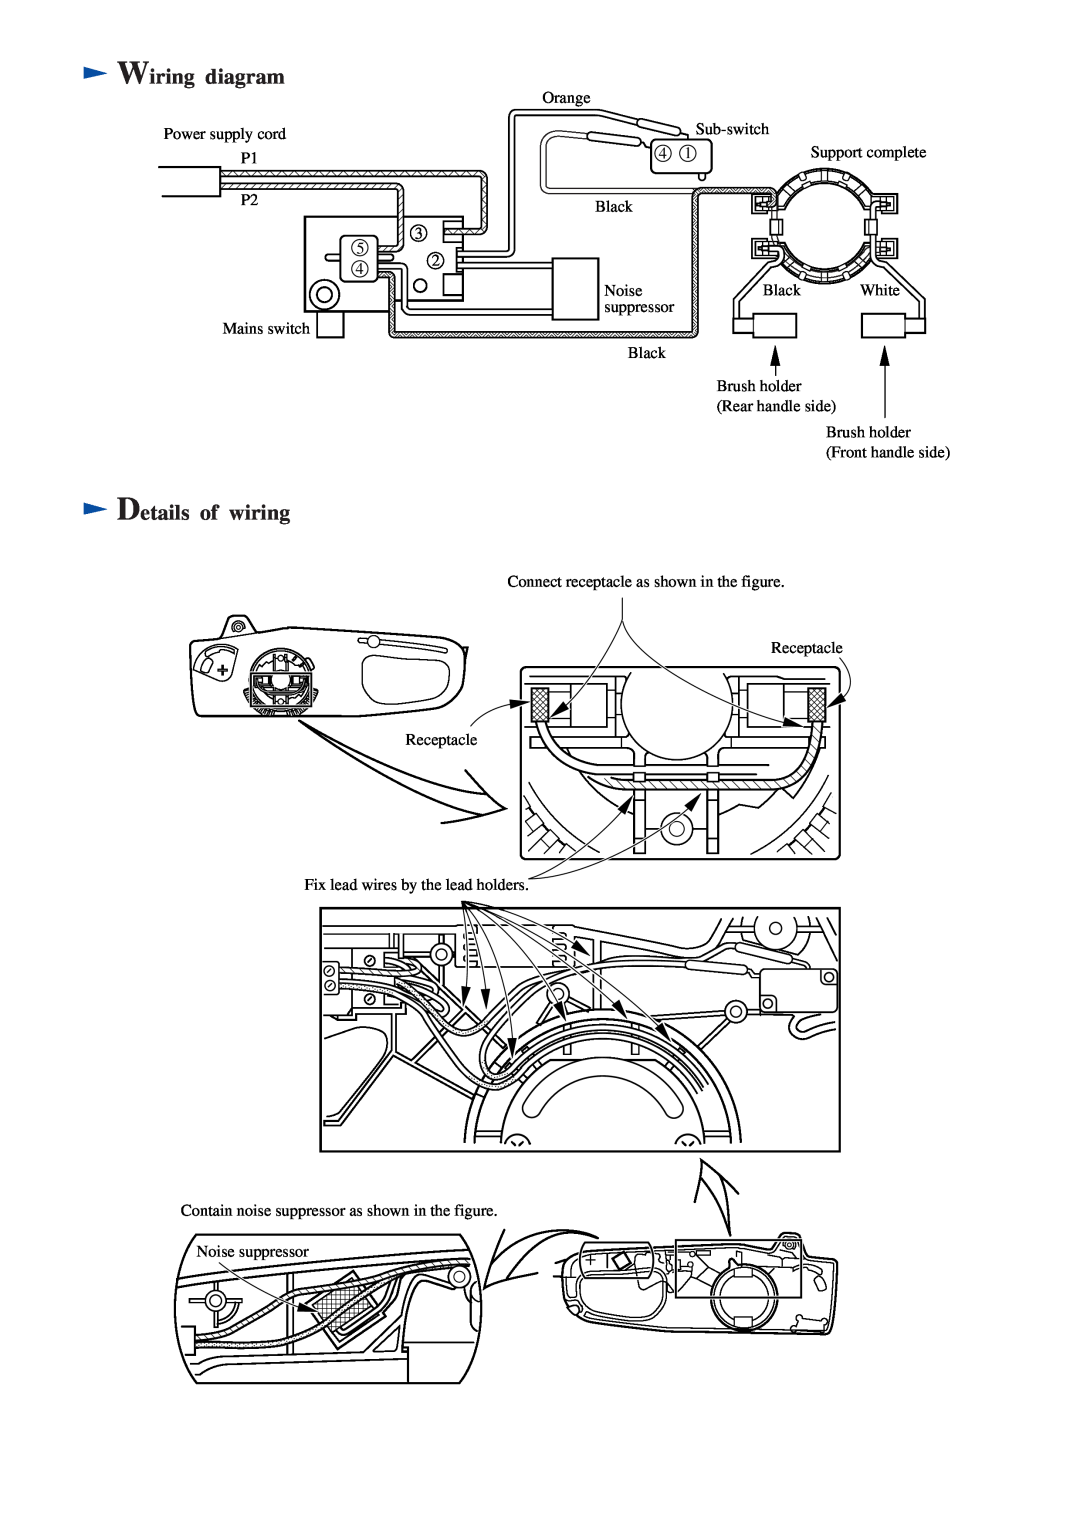 Makita UC3510A specifications Wiring diagram, Details of wiring 